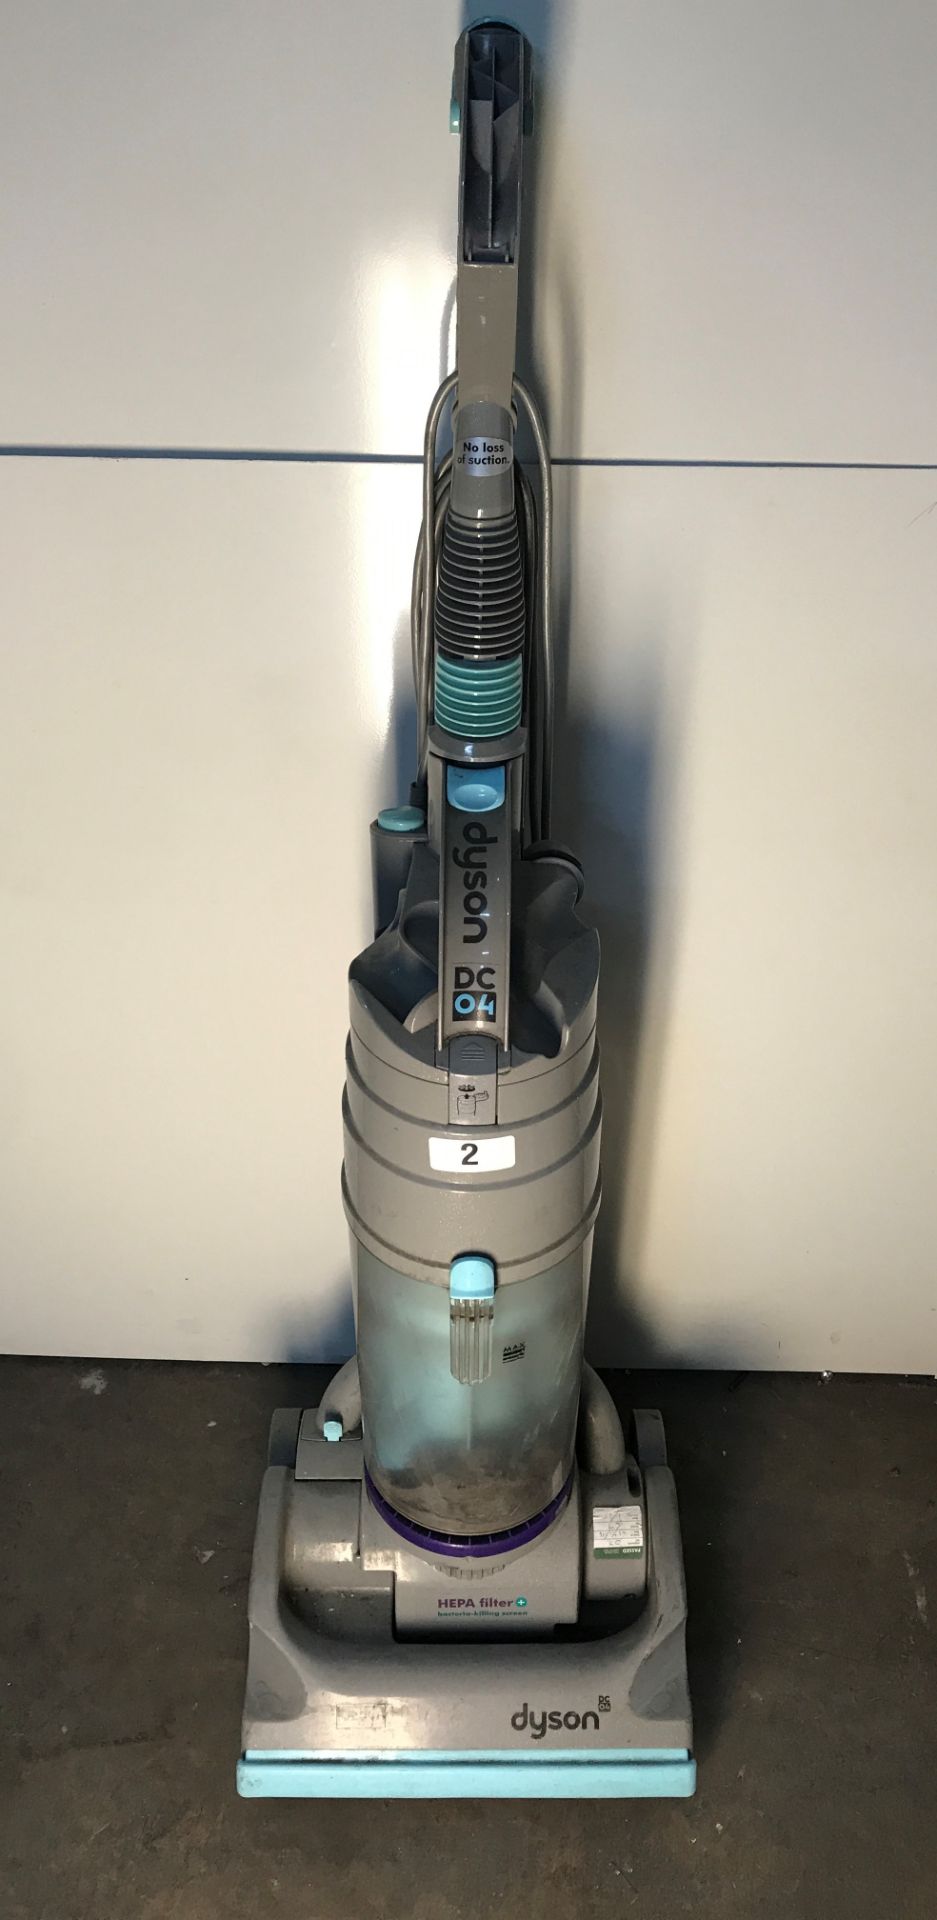 Dyson DC04 Vacuum Cleaner - Image 2 of 4